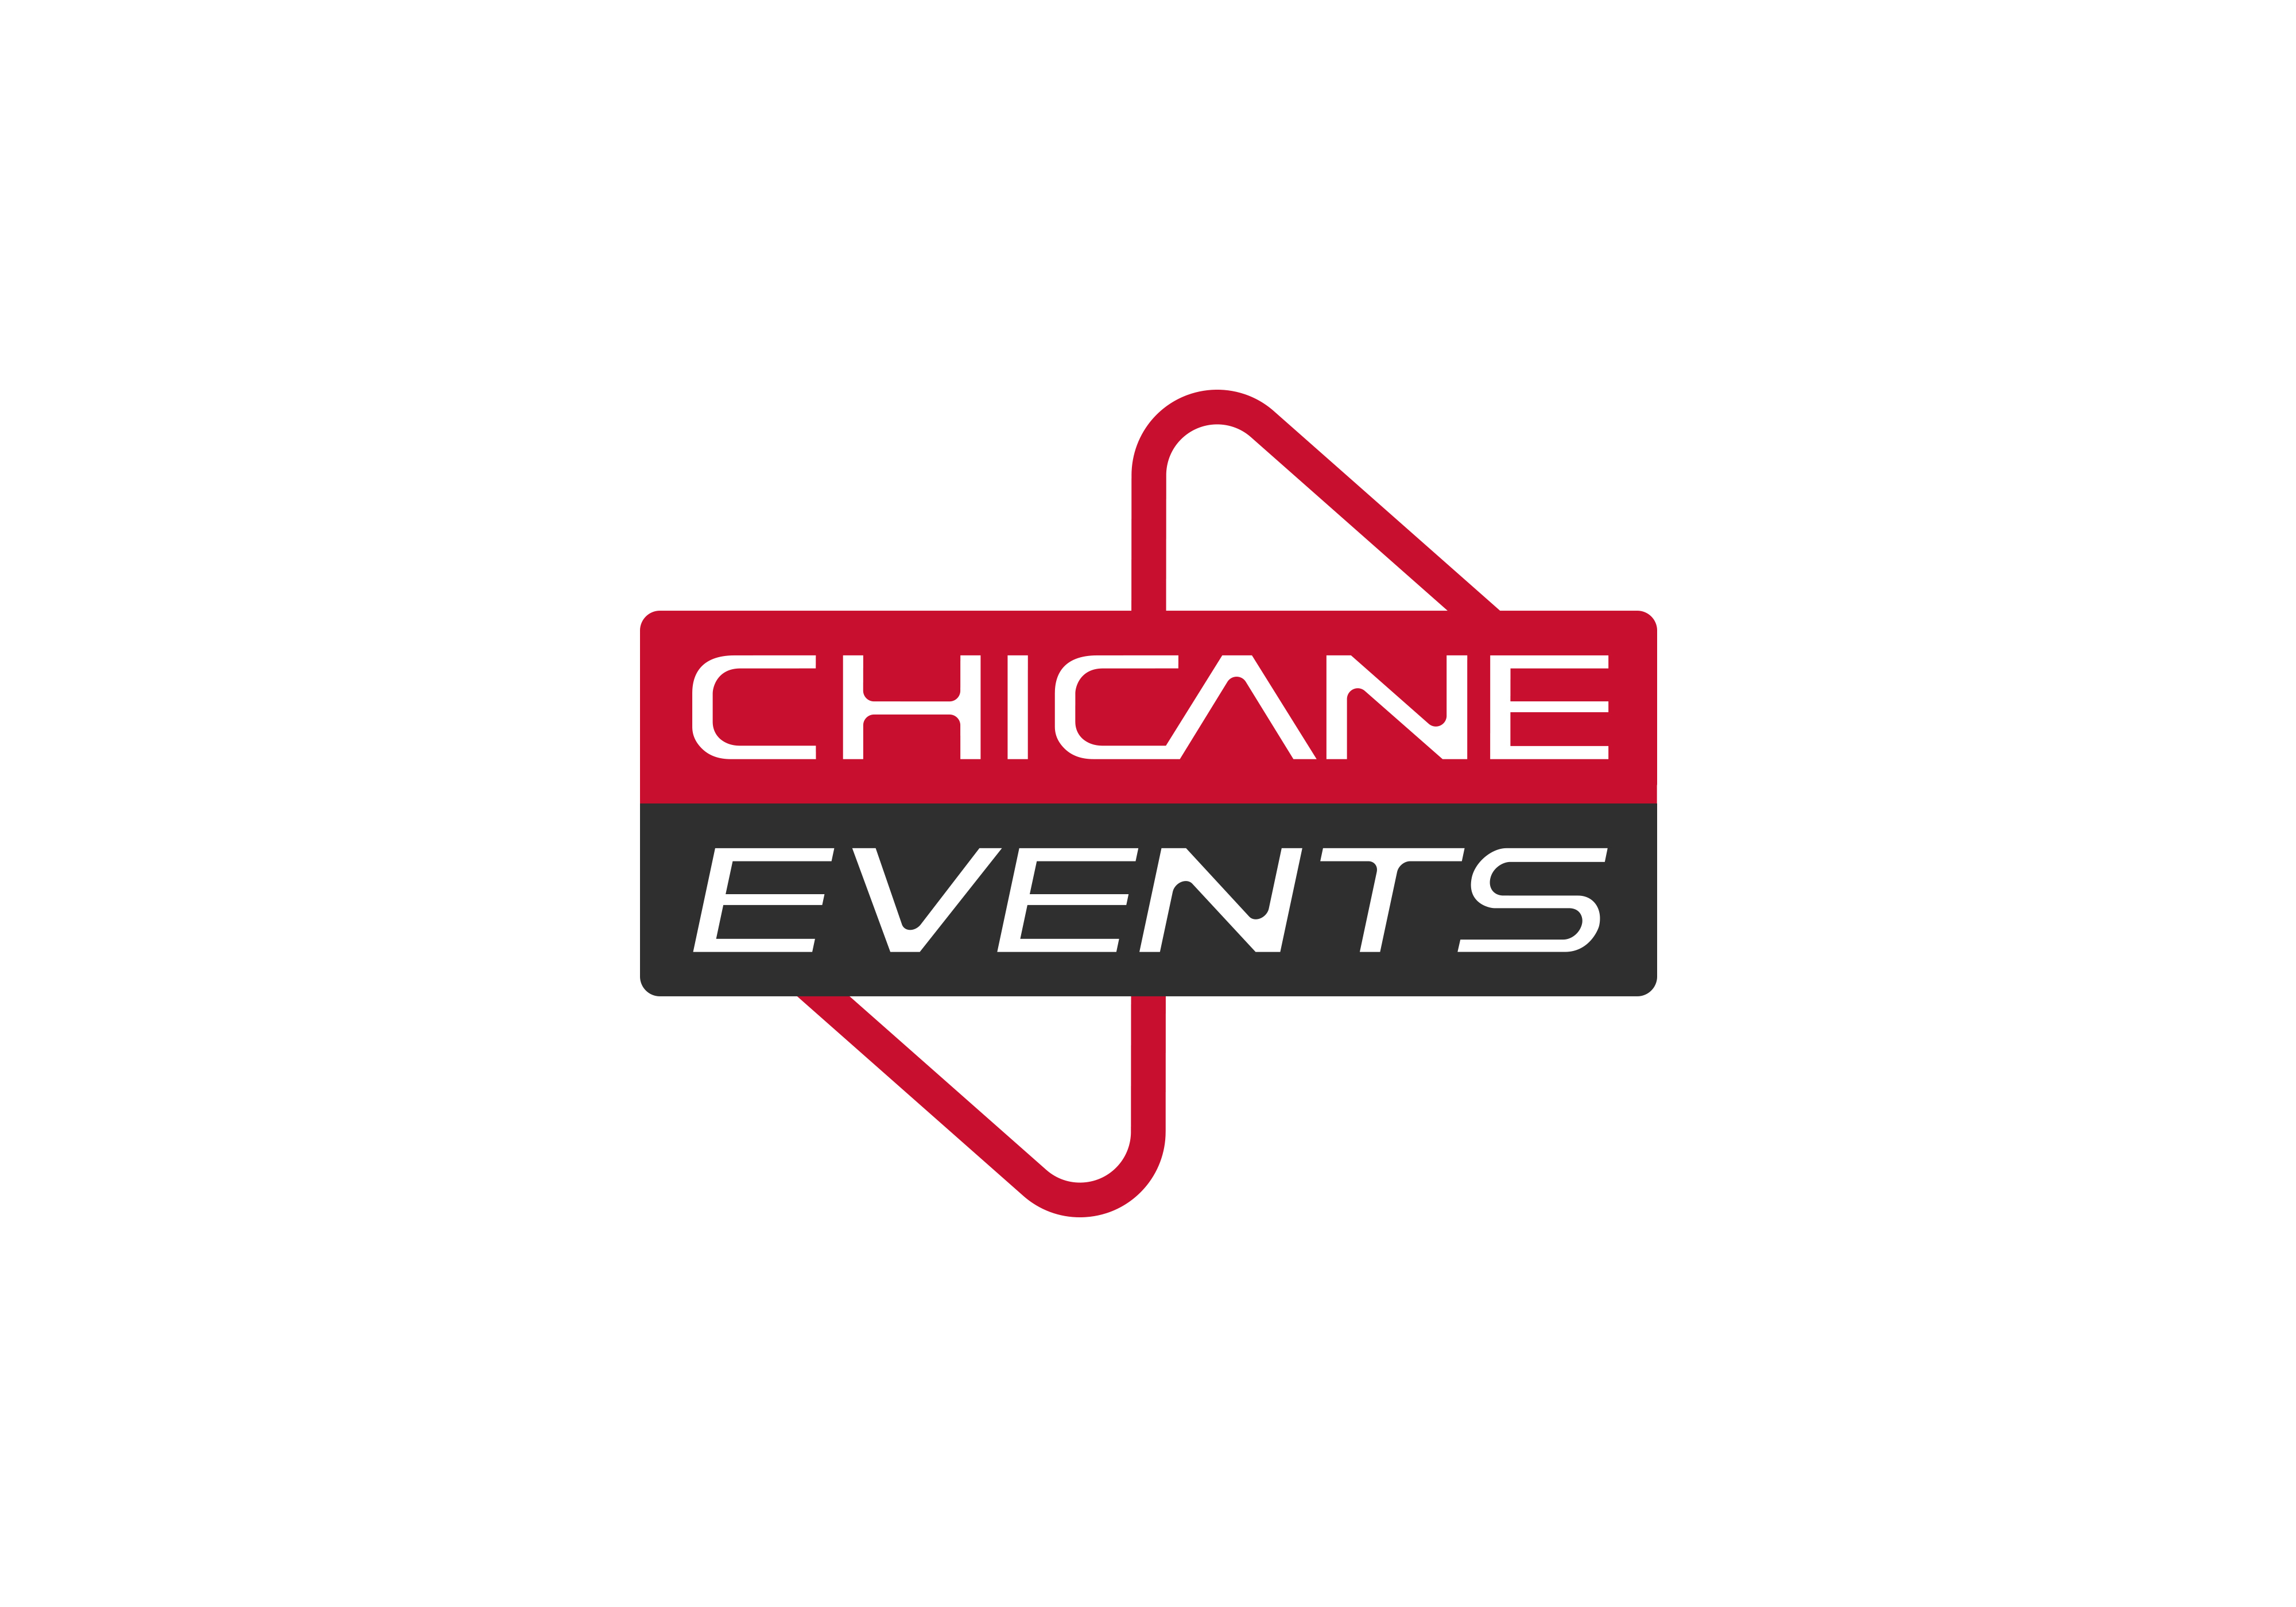 Chicane Events